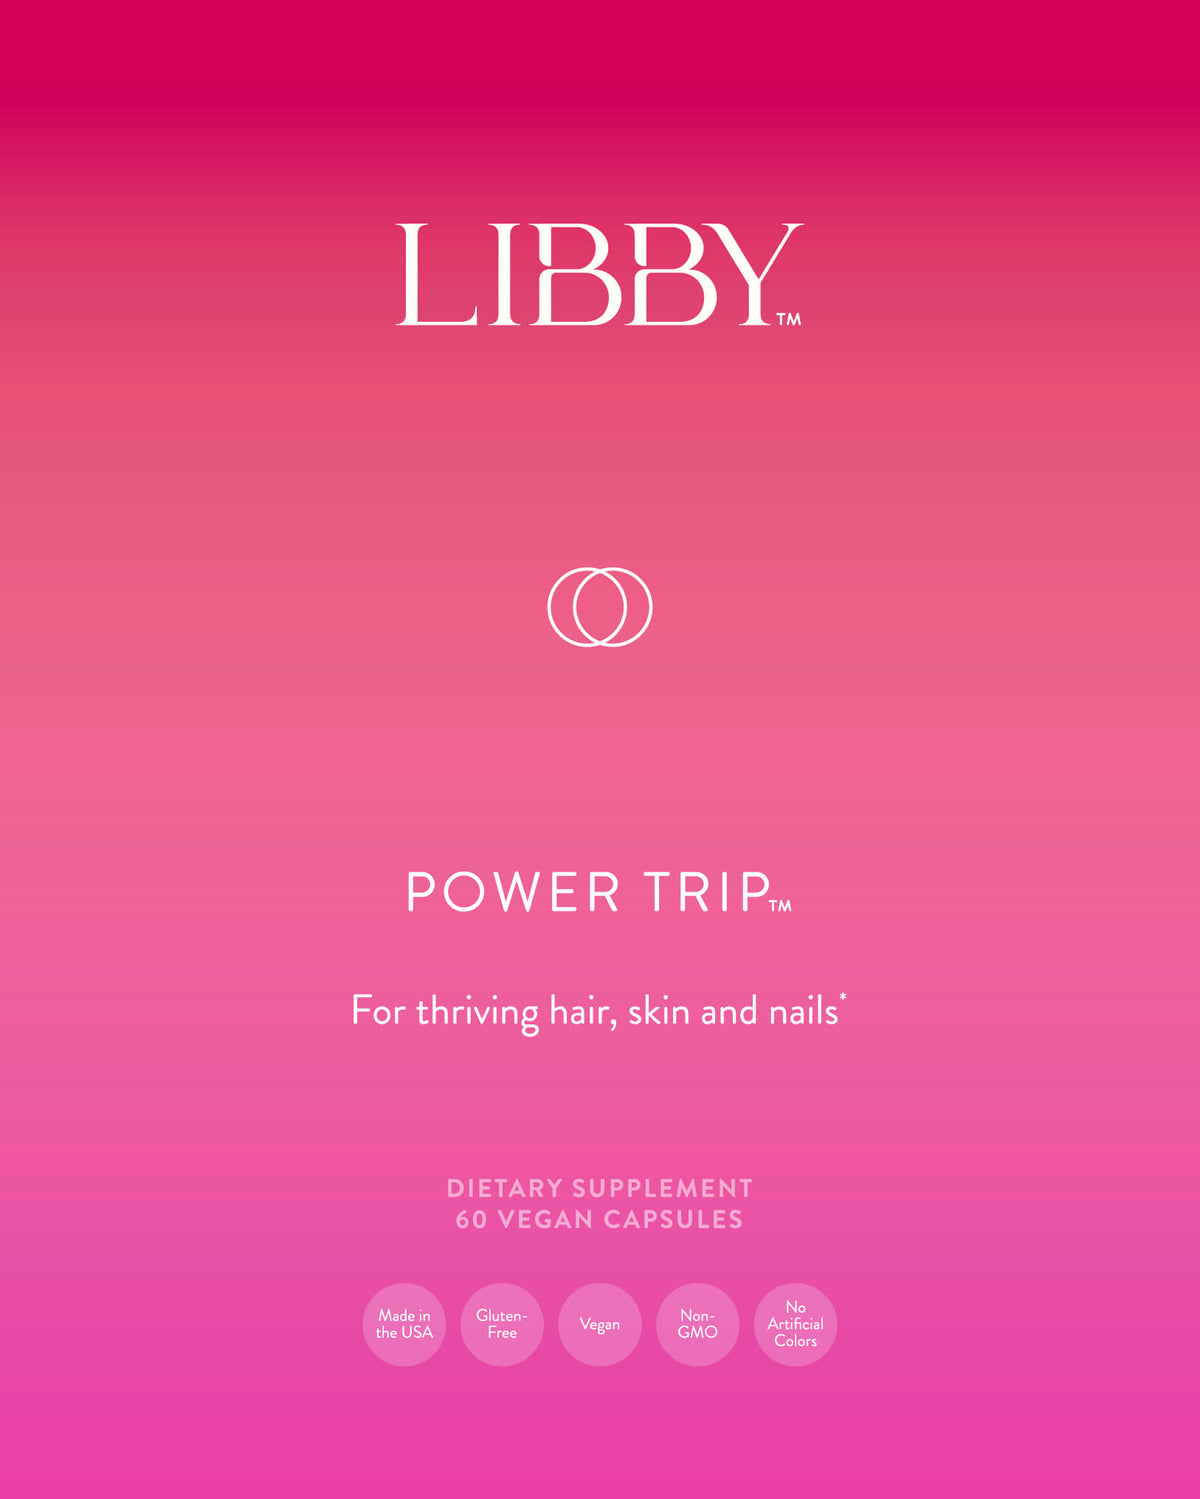 The Libby System - Power Trip packaging label.